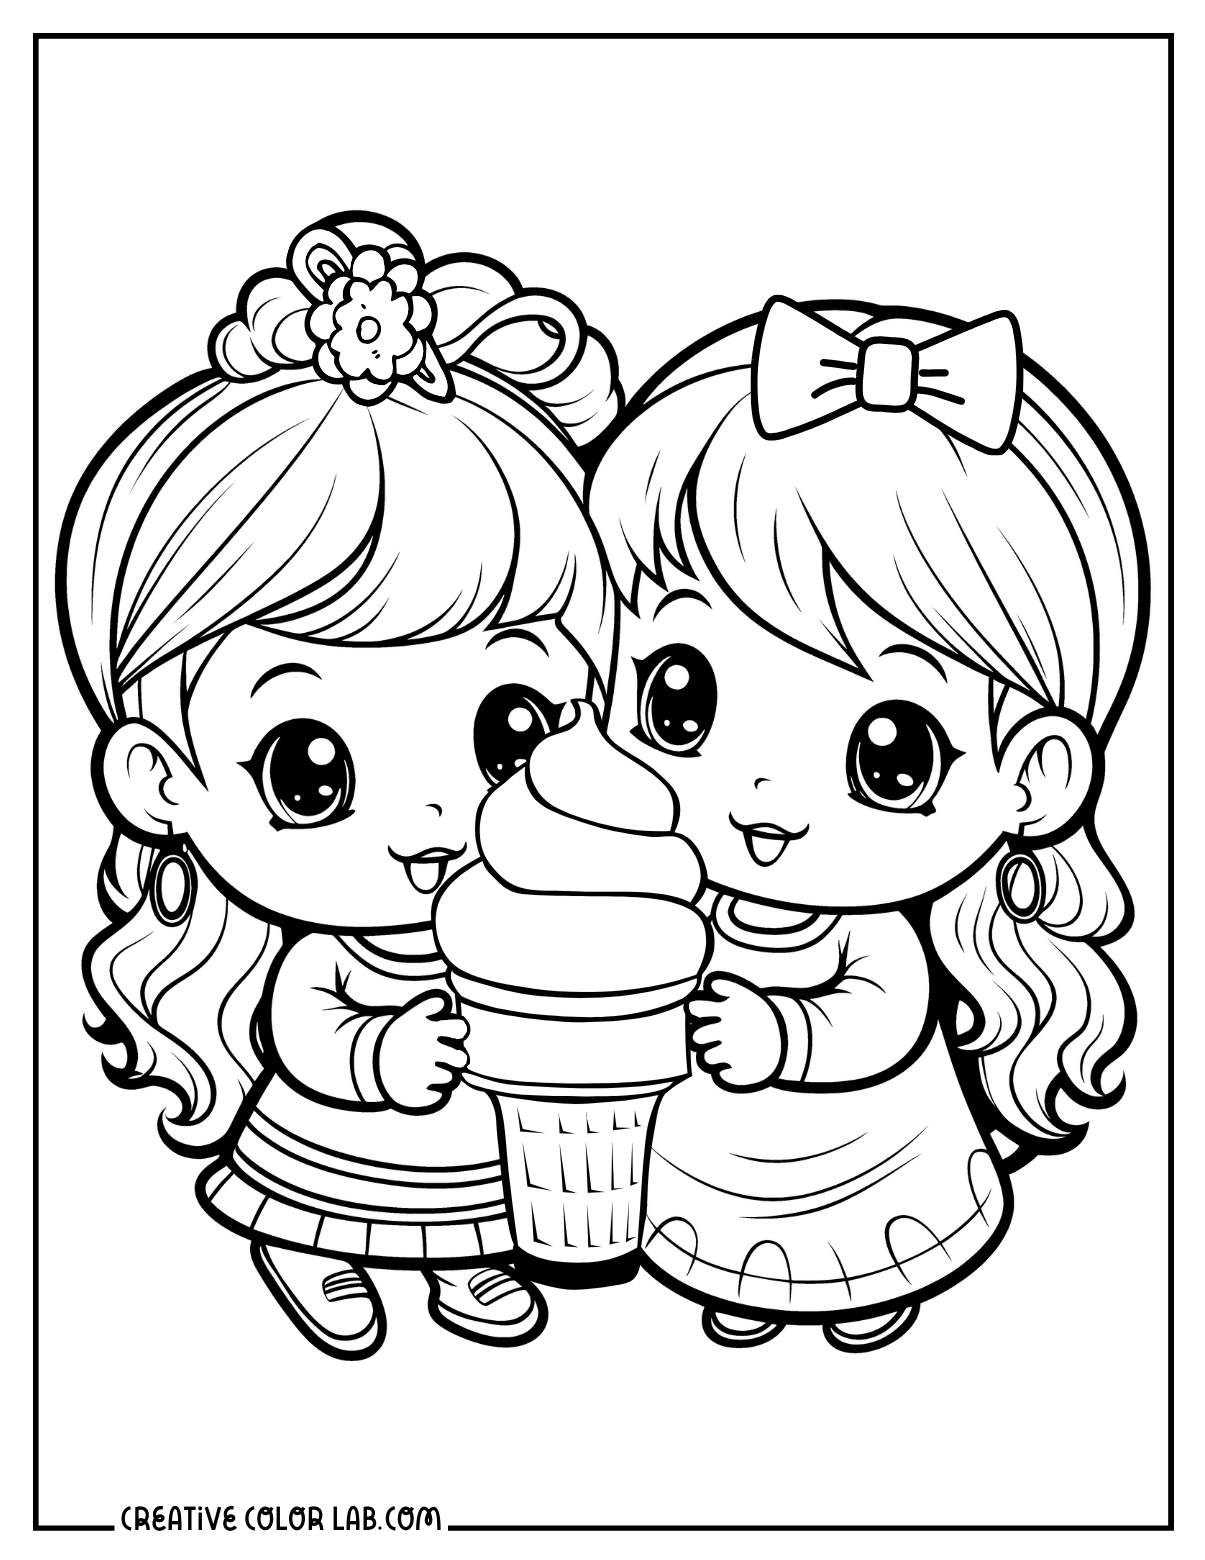 Chibii best friends coloring page for kids.